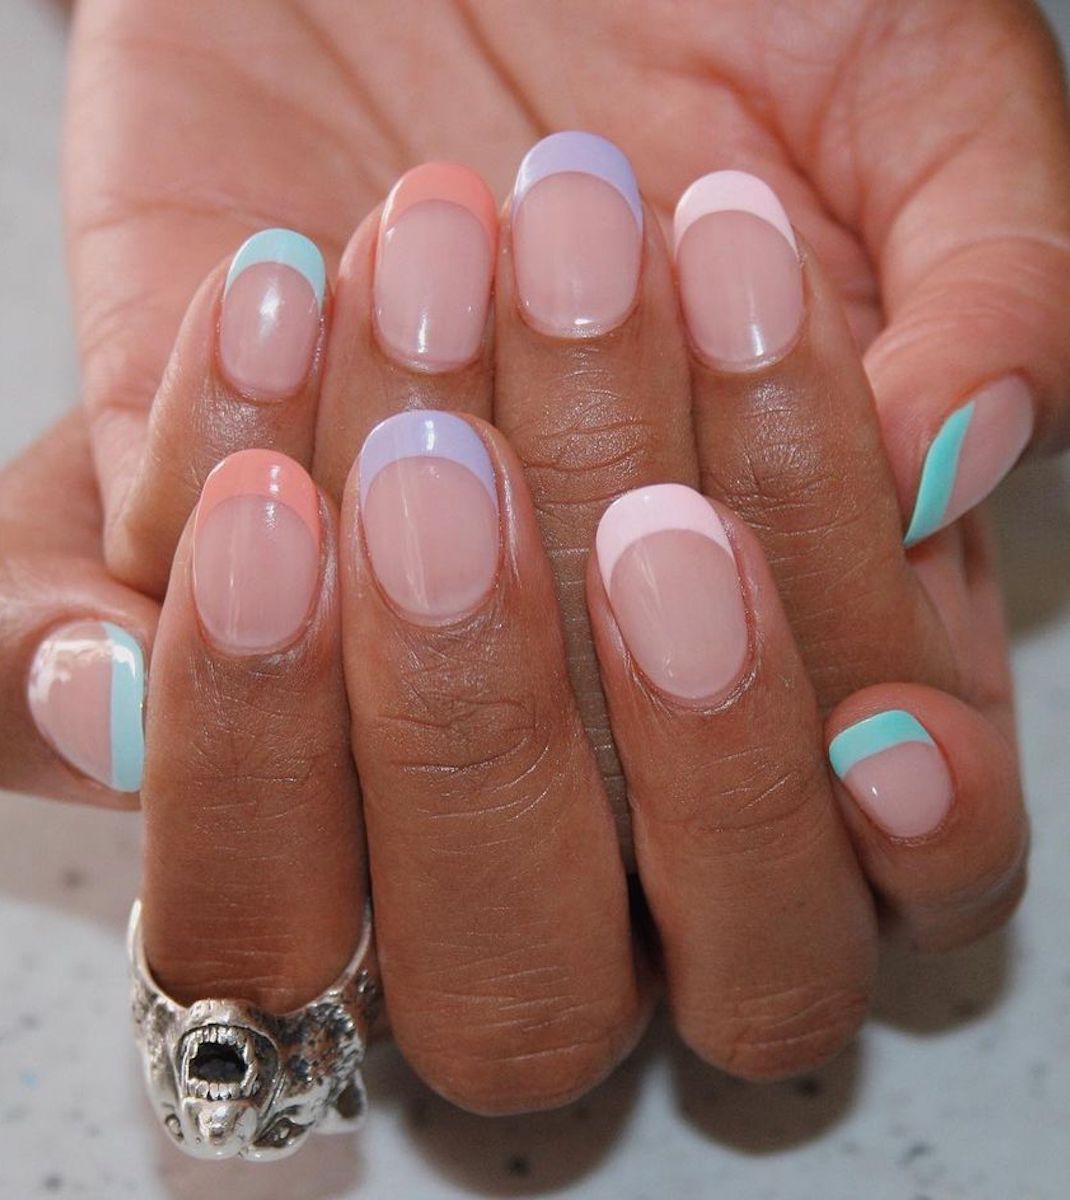 Colourful French manicures: Pretty Pastels